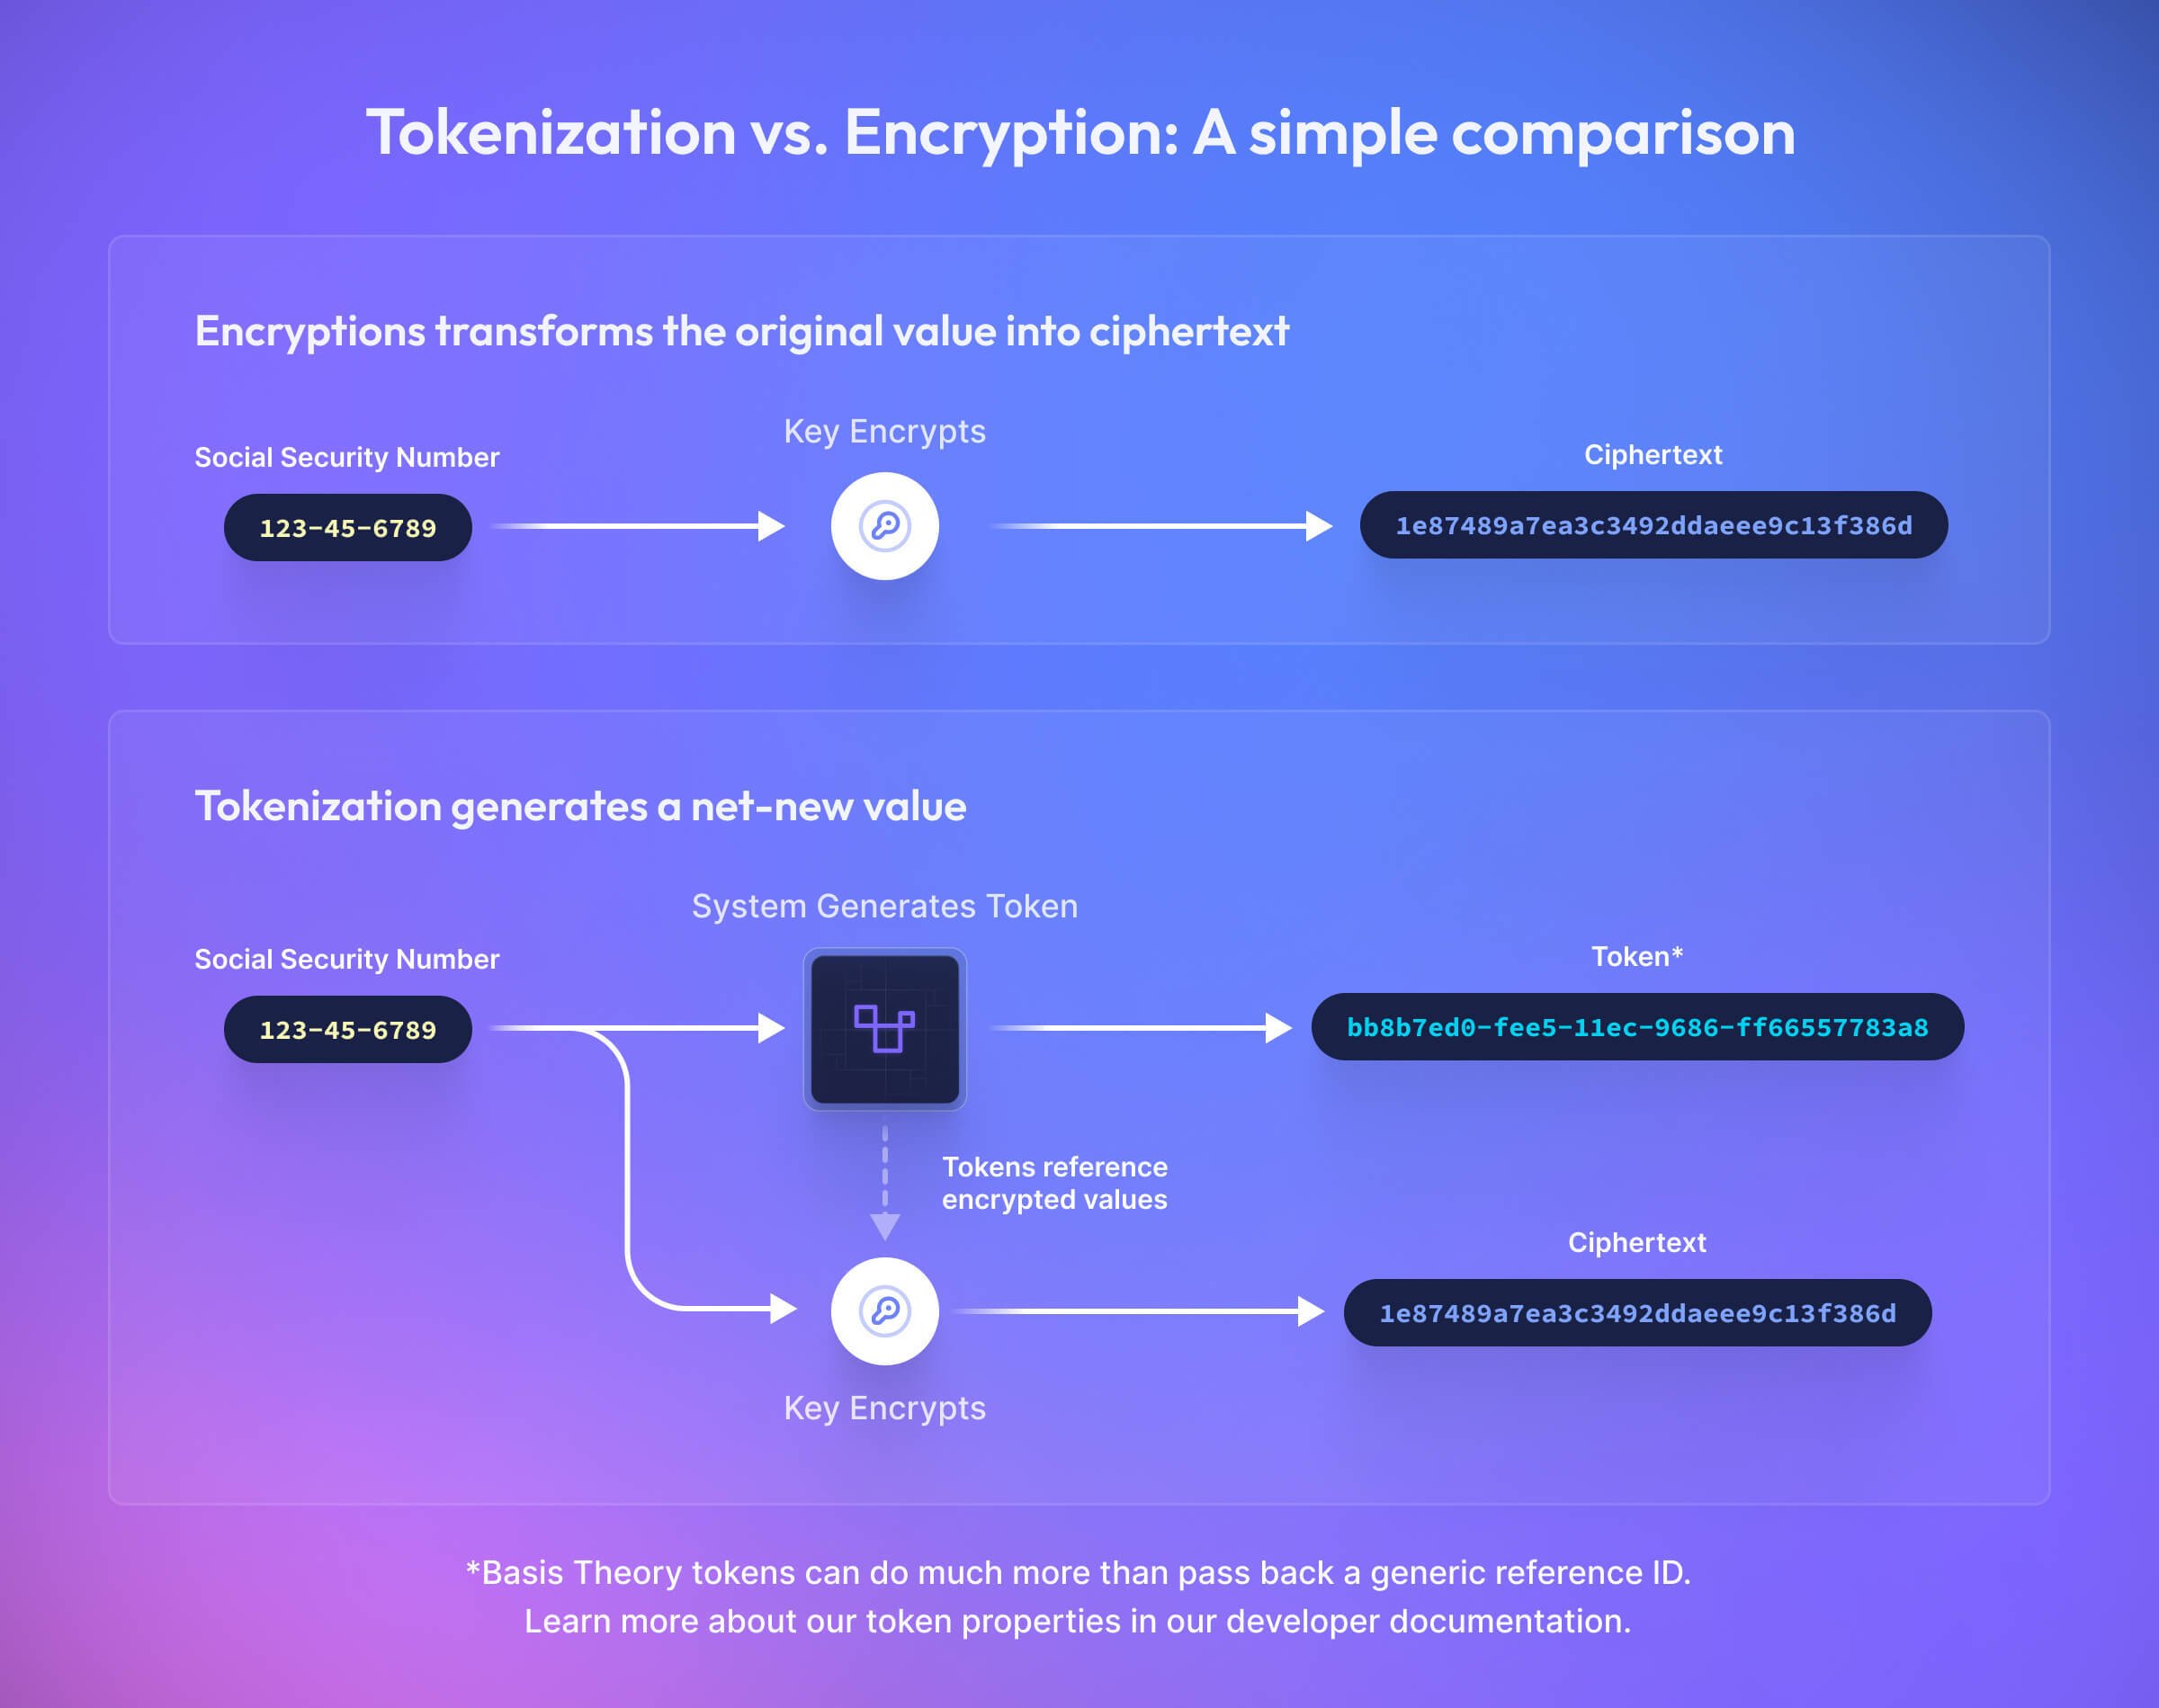 Breaks down the key difference between data tokenization and data encryption, showing that encryption scrambles an original value while tokenization generates a net new value.